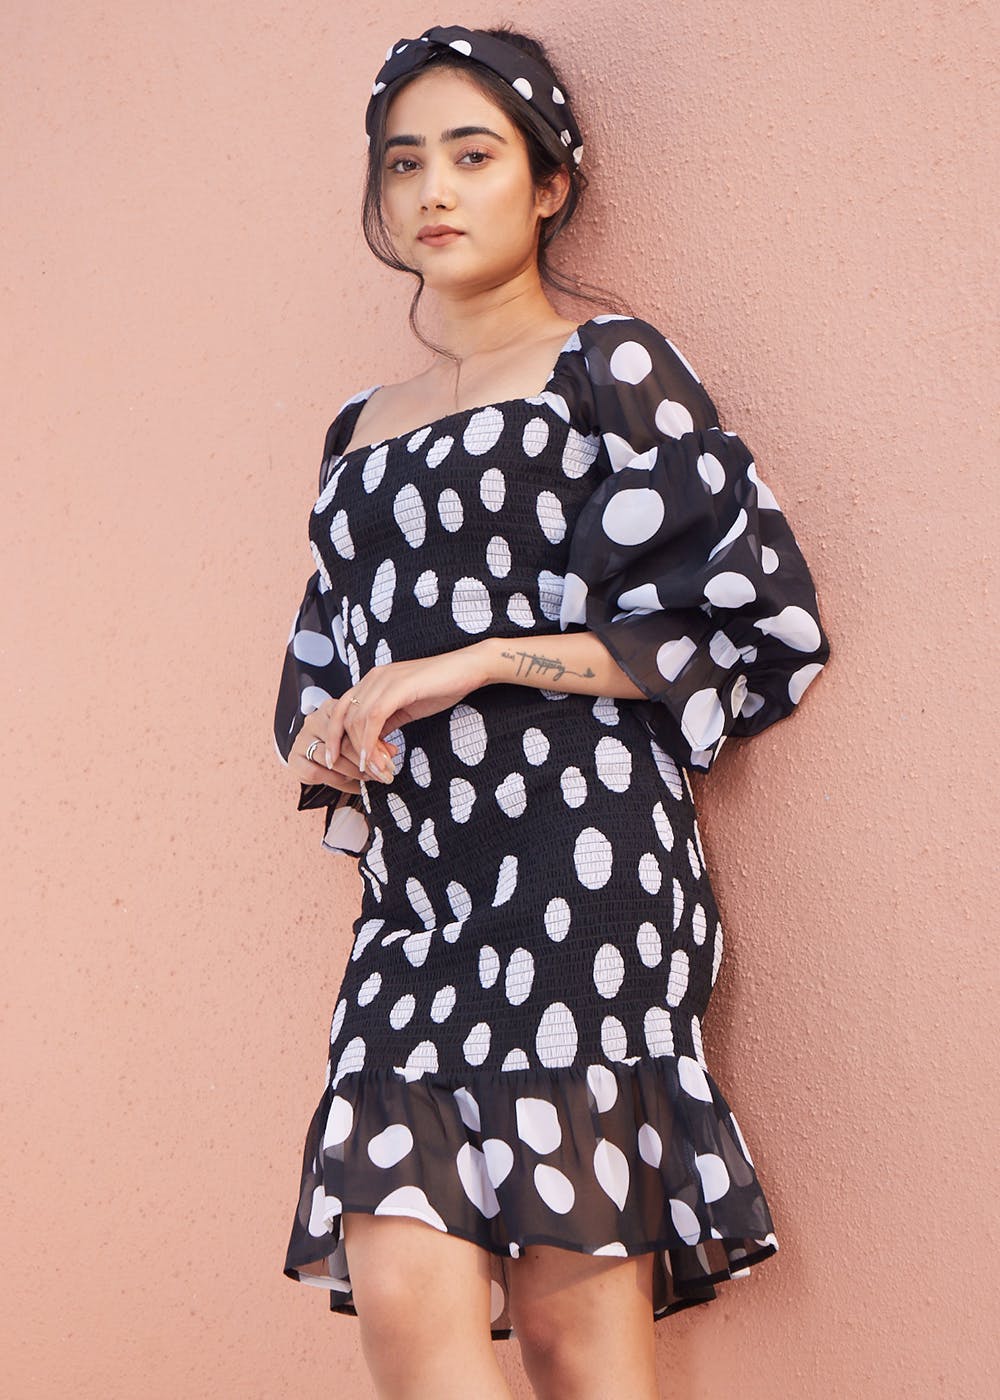 Black and White Polka Dot Maxi - Queen of Sleeves